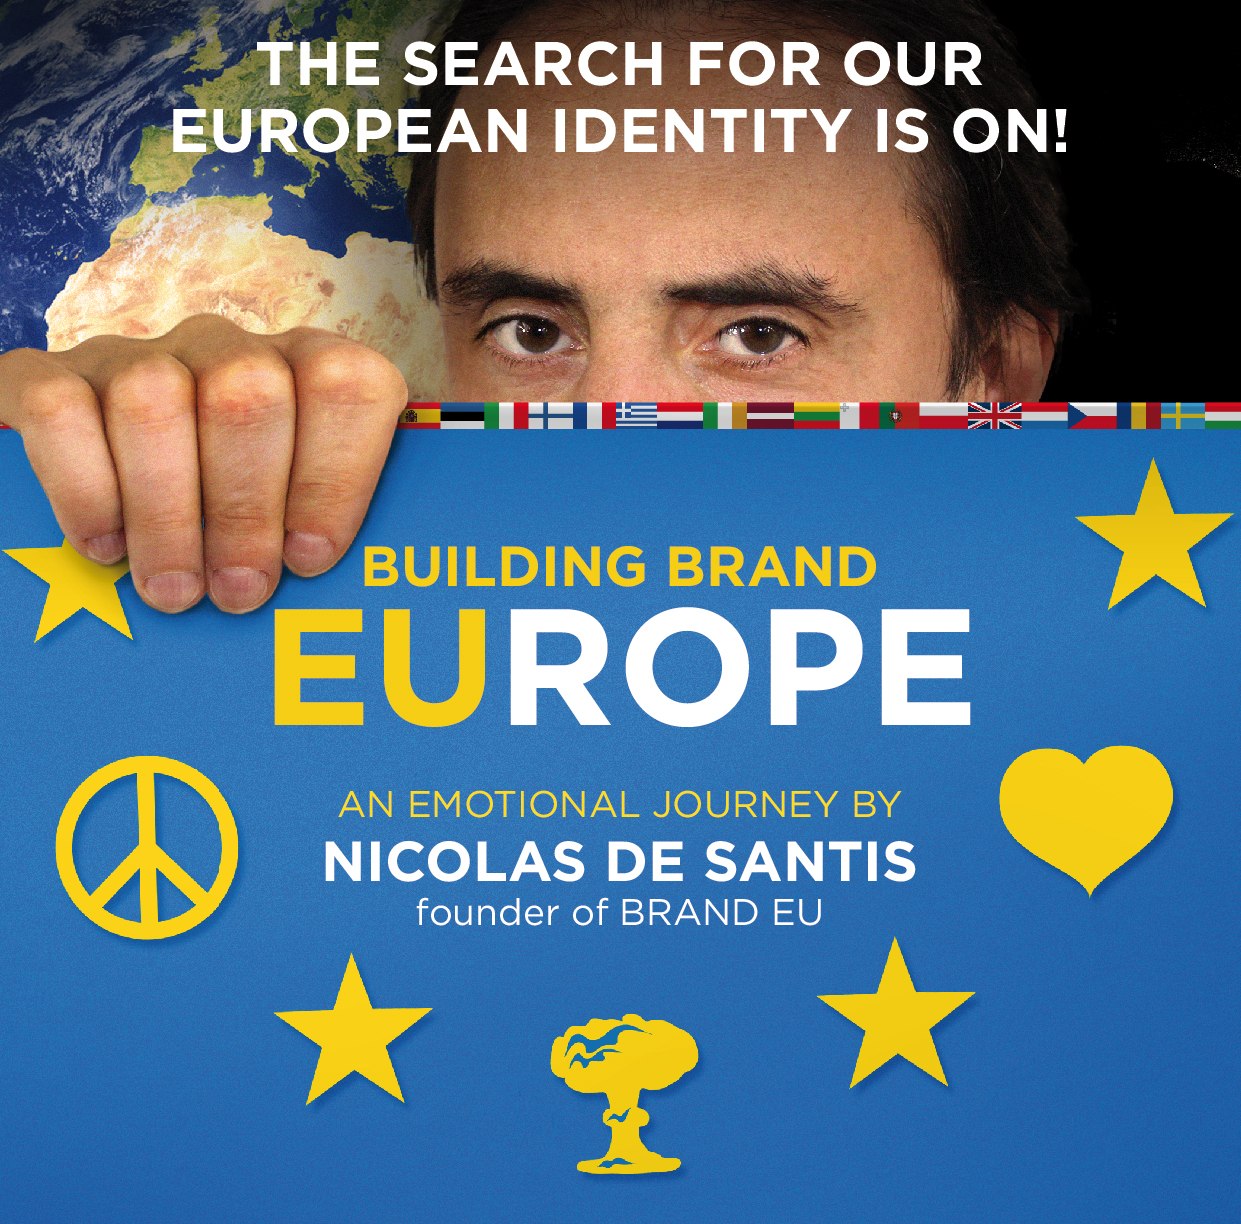 BOOK OUR KEYNOTE PRESENTATION: BUILDING BRAND EUROPE. BRAND EU FOUNDER, NICOLAS DE SANTIS, ON THE CURRENT STATE OF BRAND EUROPE AND THE TRUTH ABOUT BREXIT.